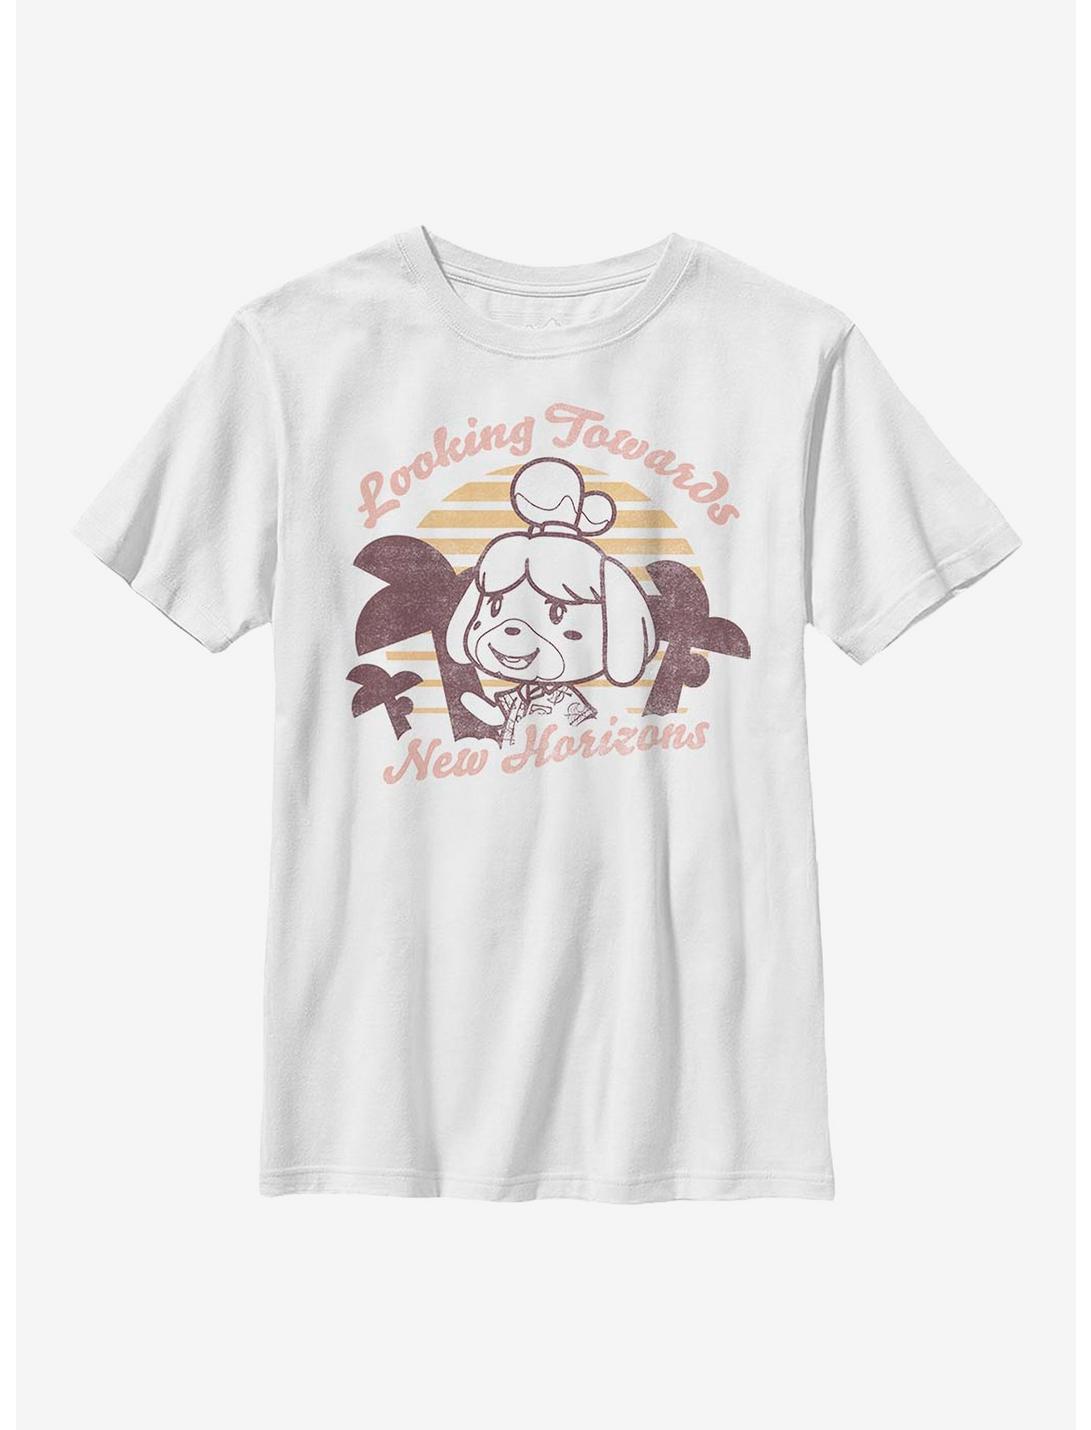 Animal Crossing: New Horizons Isabelle Youth T-Shirt, WHITE, hi-res